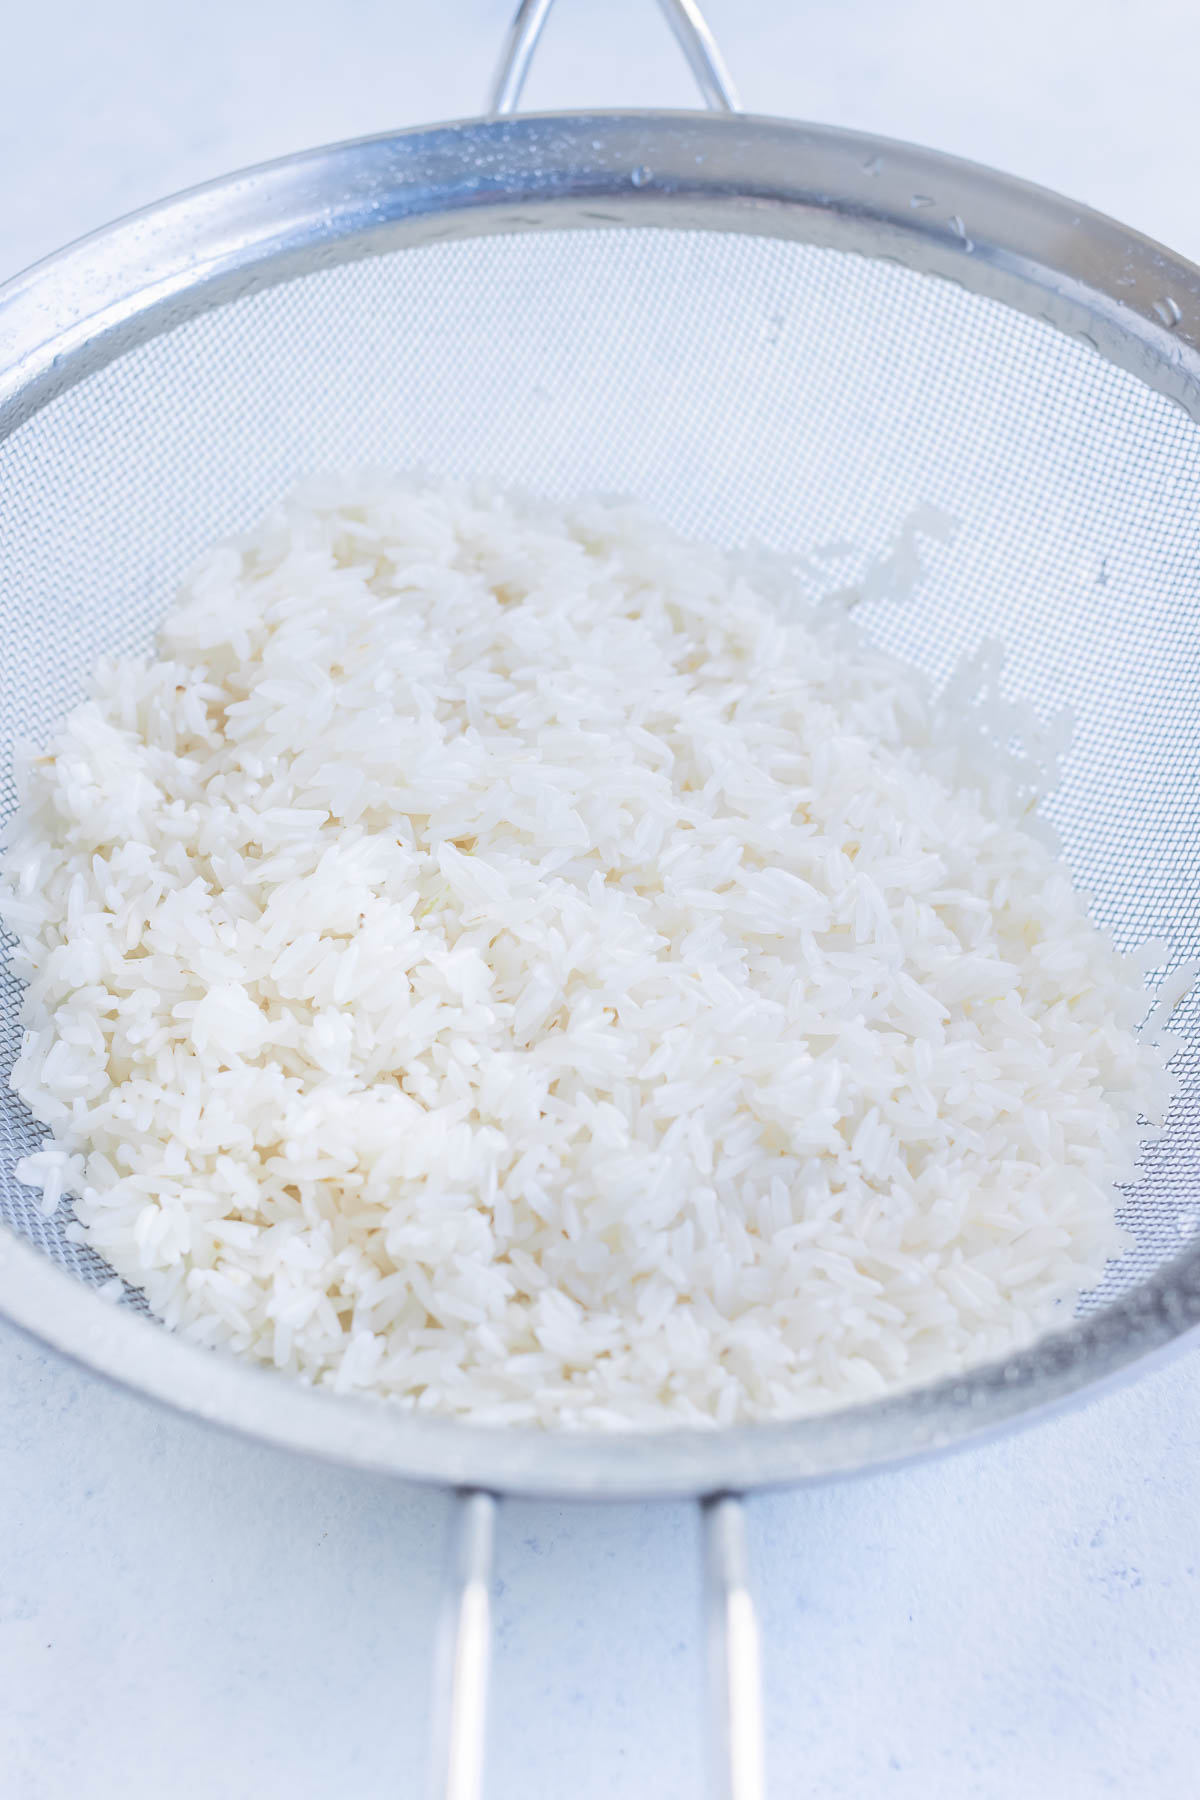 Rice is rinsed in the sink before cooking.